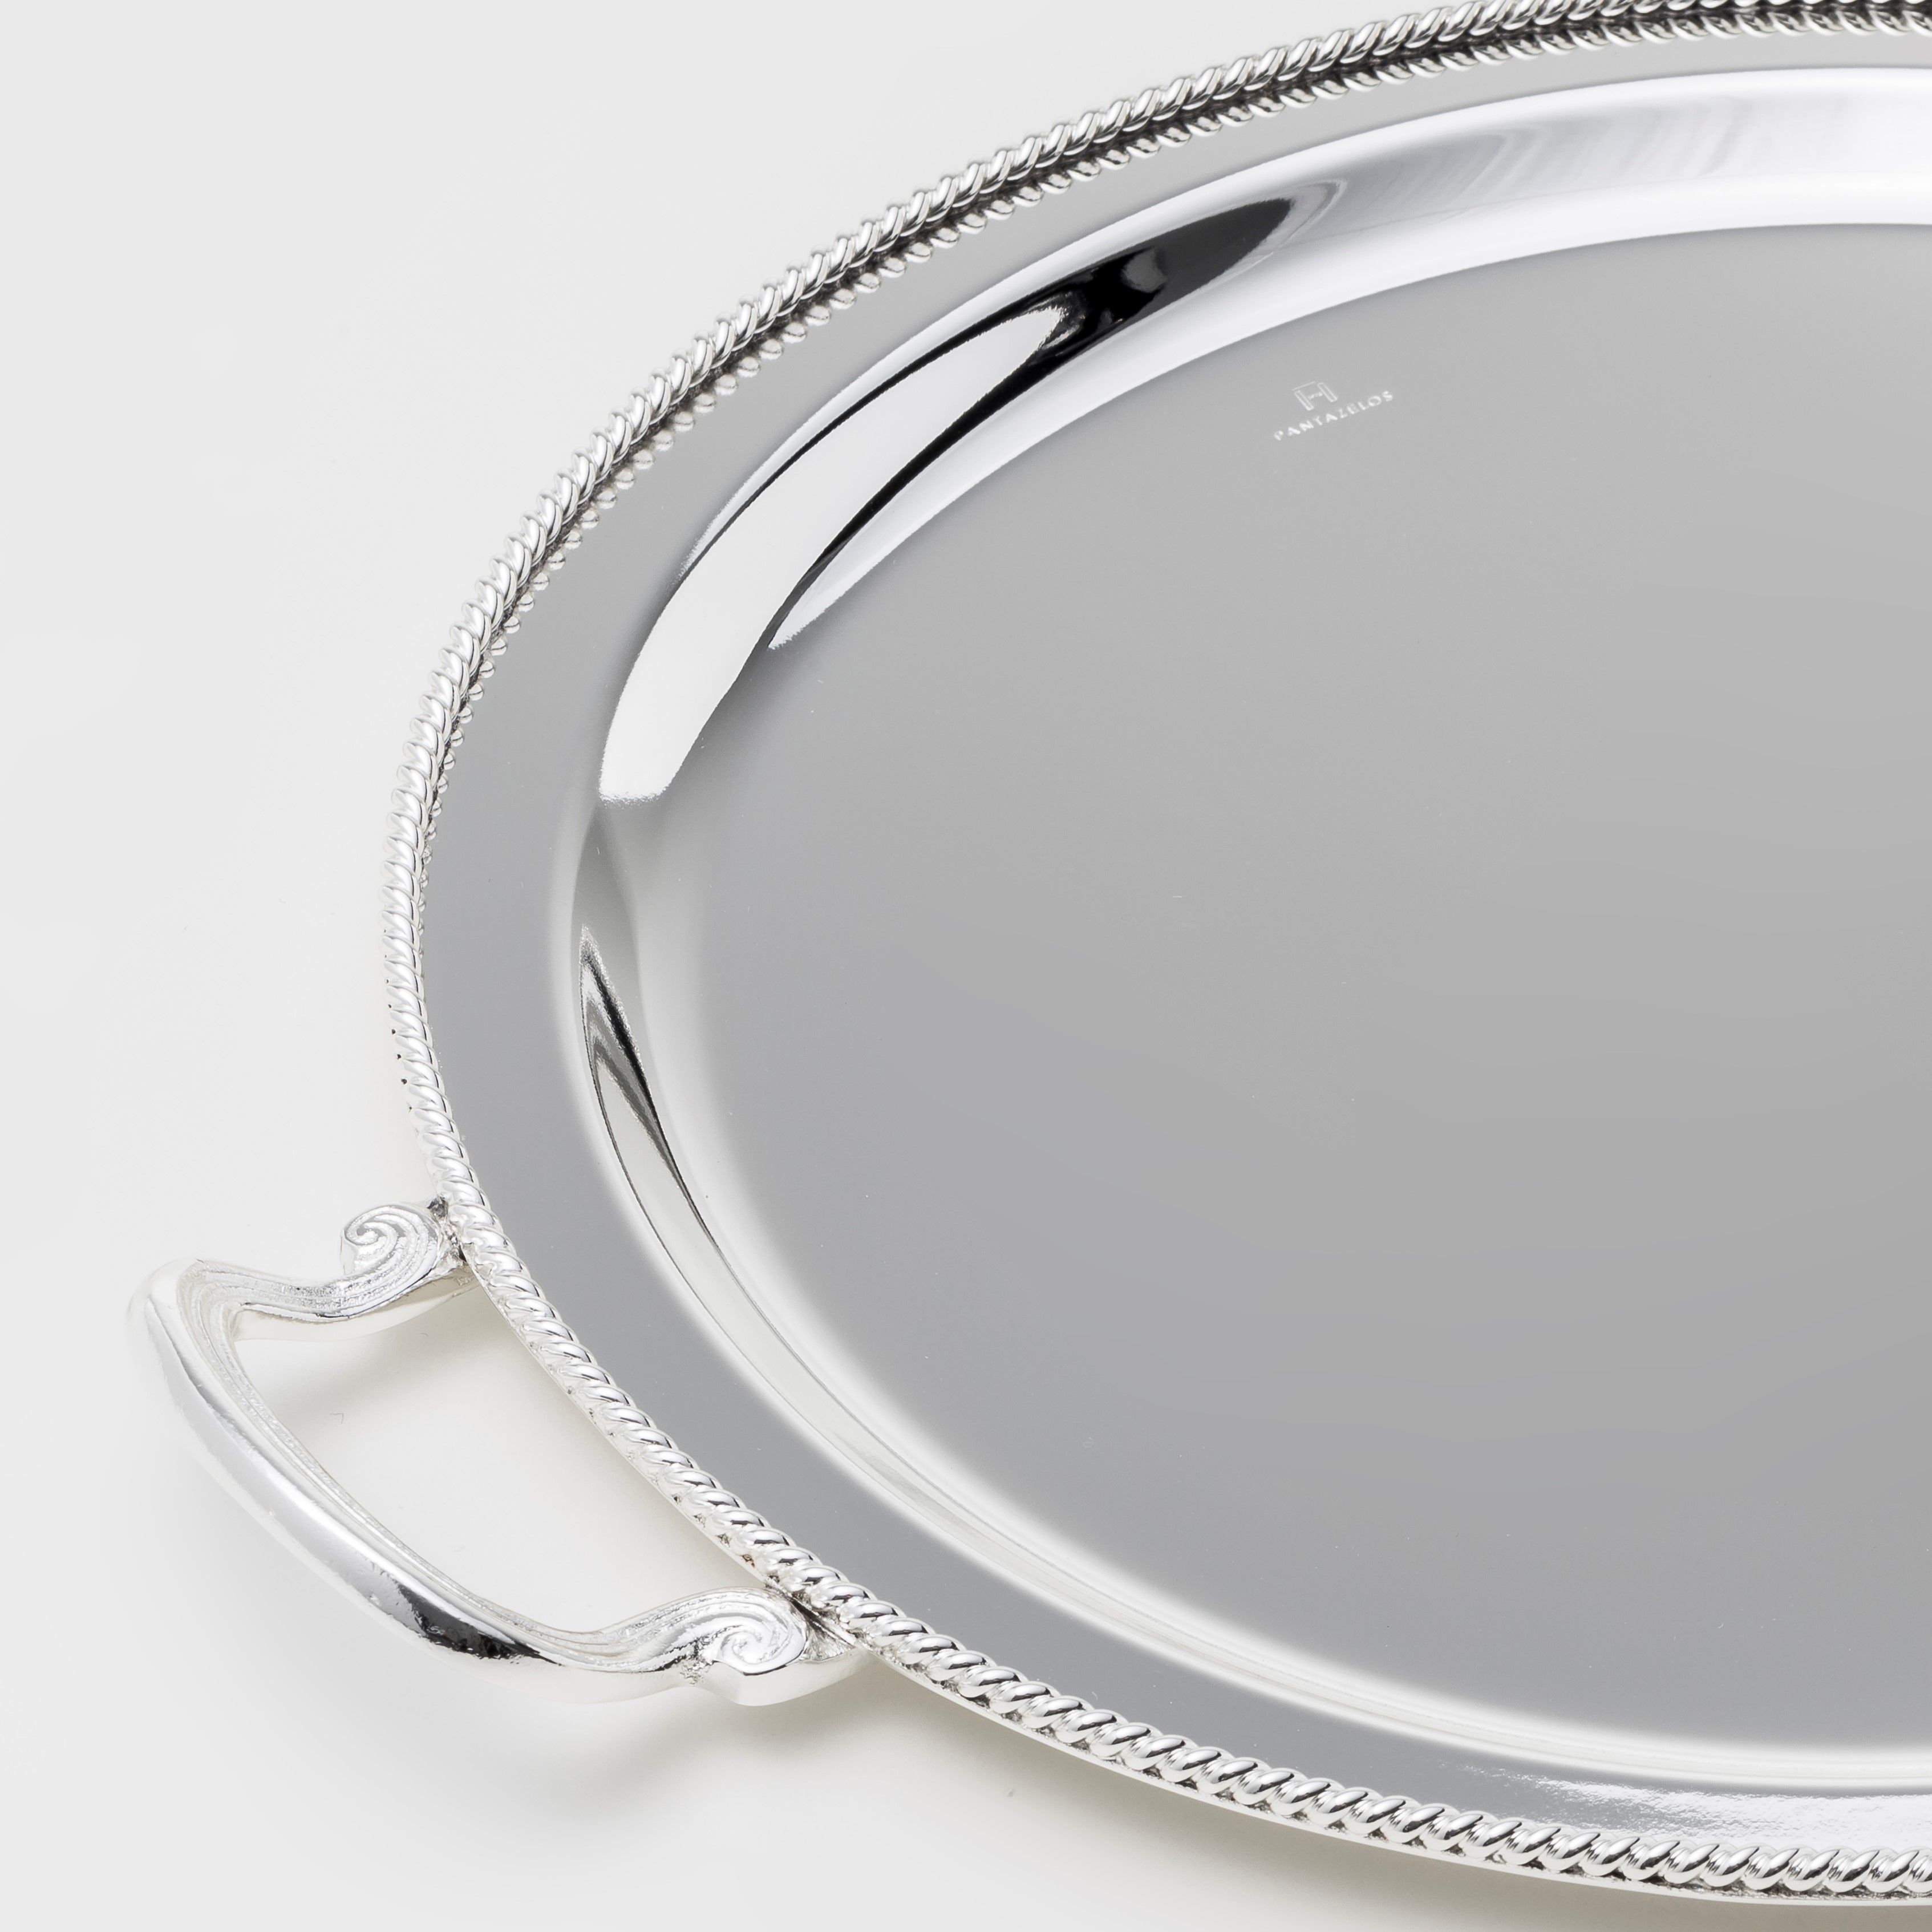 SILVER PLATED TRAY, ROUND ,D.40 CM WITH DECOR ''ROPE''